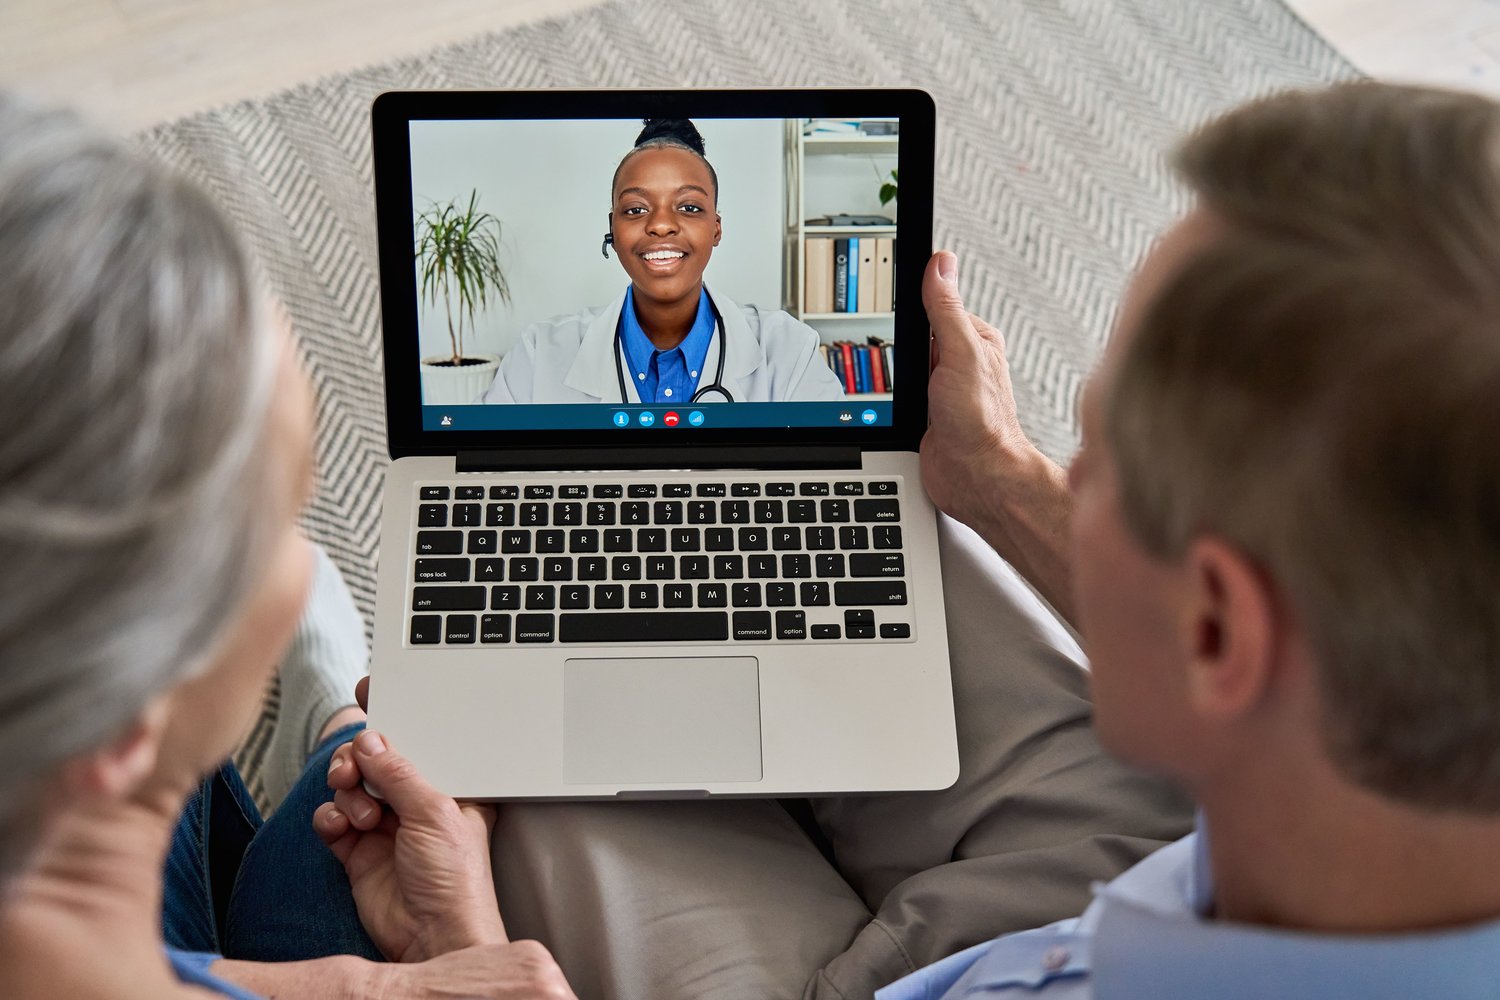 Senior citizens take part in a telehealth appointment with a doctor.